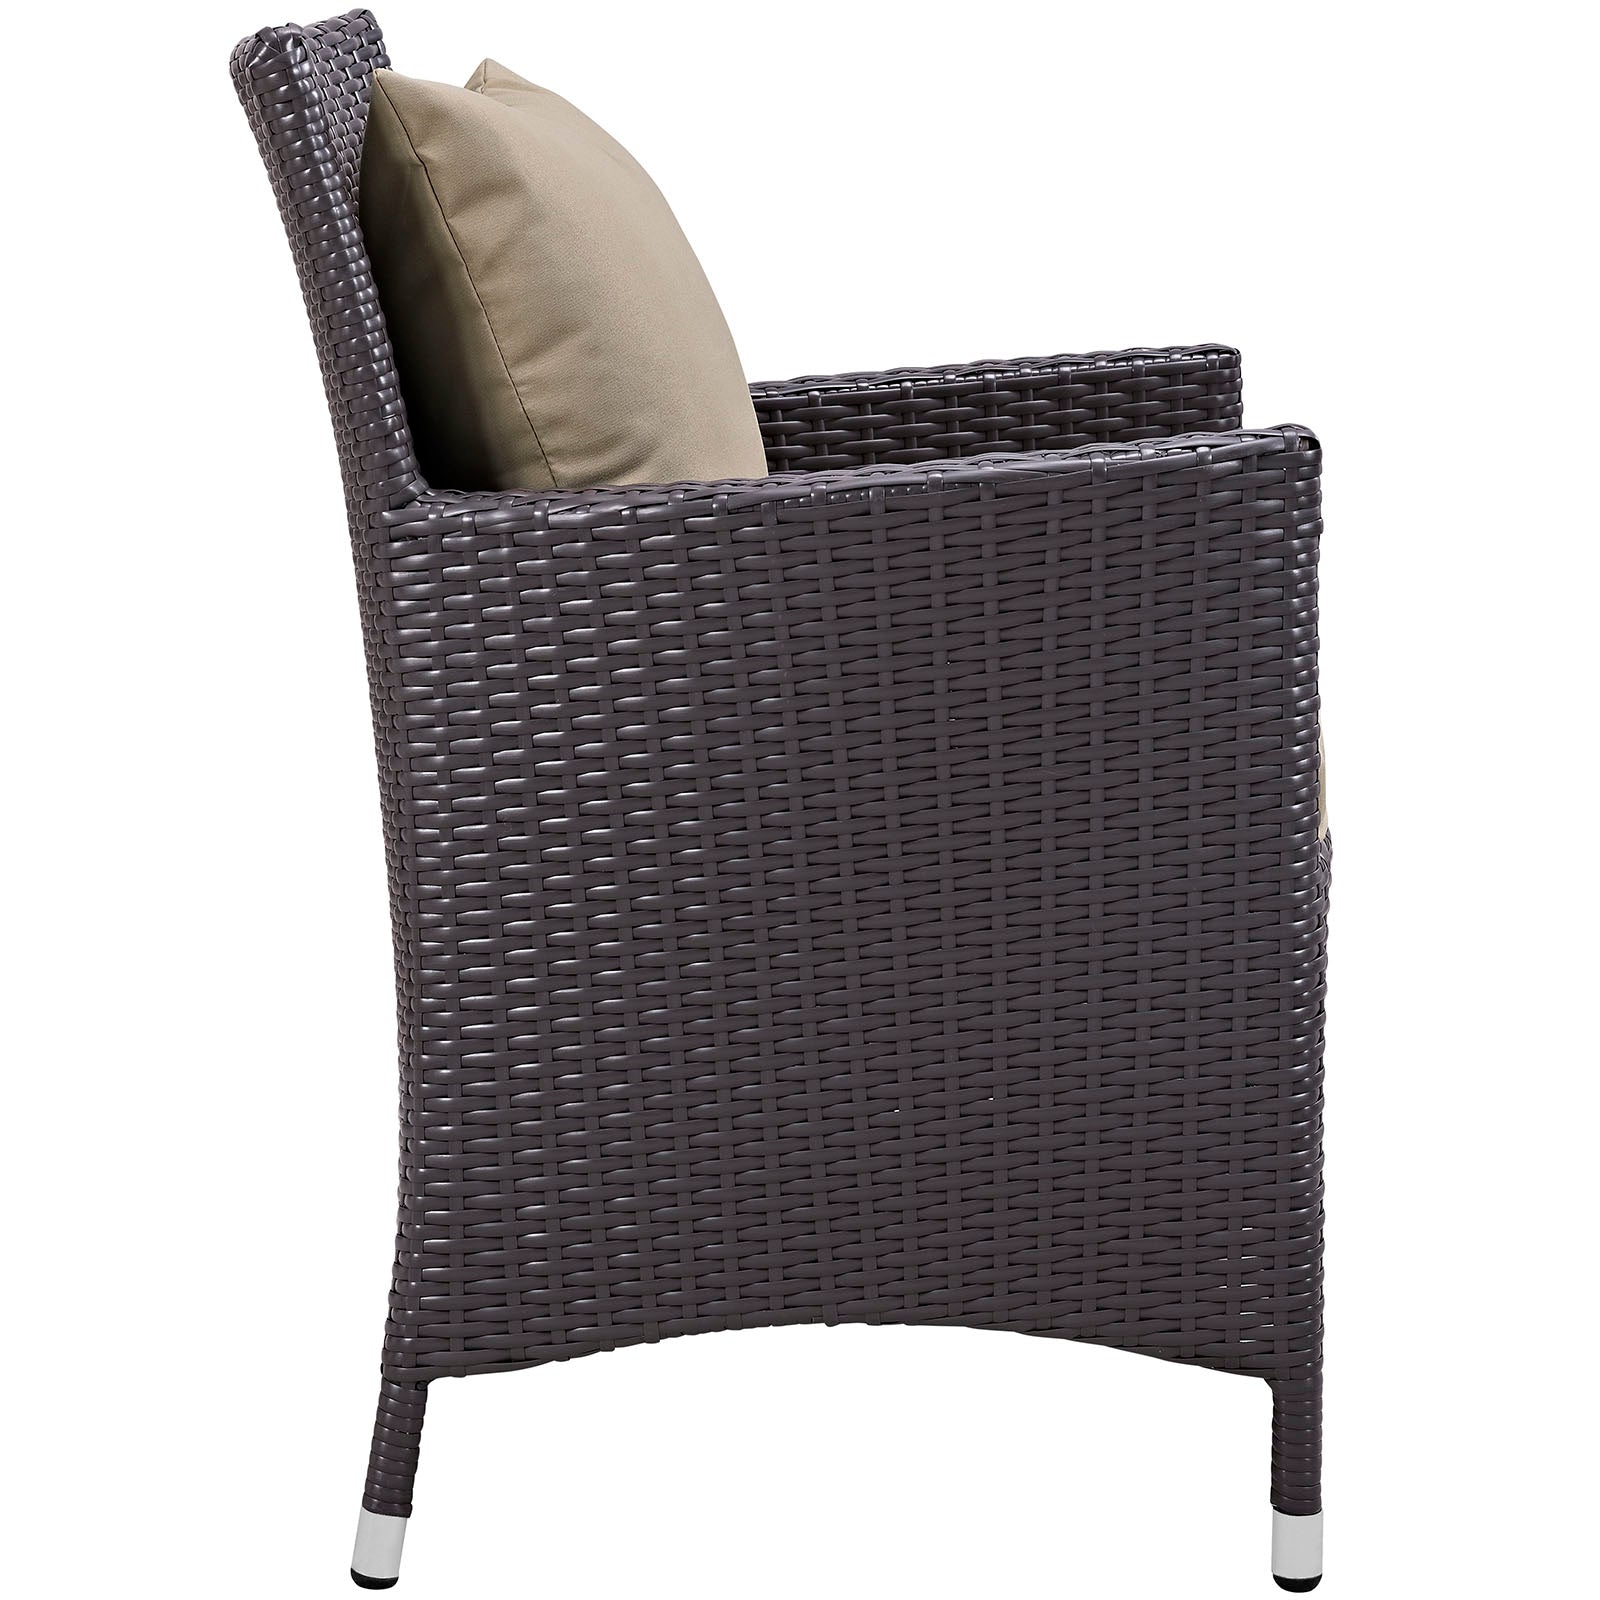 Modway Outdoor Dining Chairs - Convene Dining Outdoor Patio Armchair Espresso Mocha